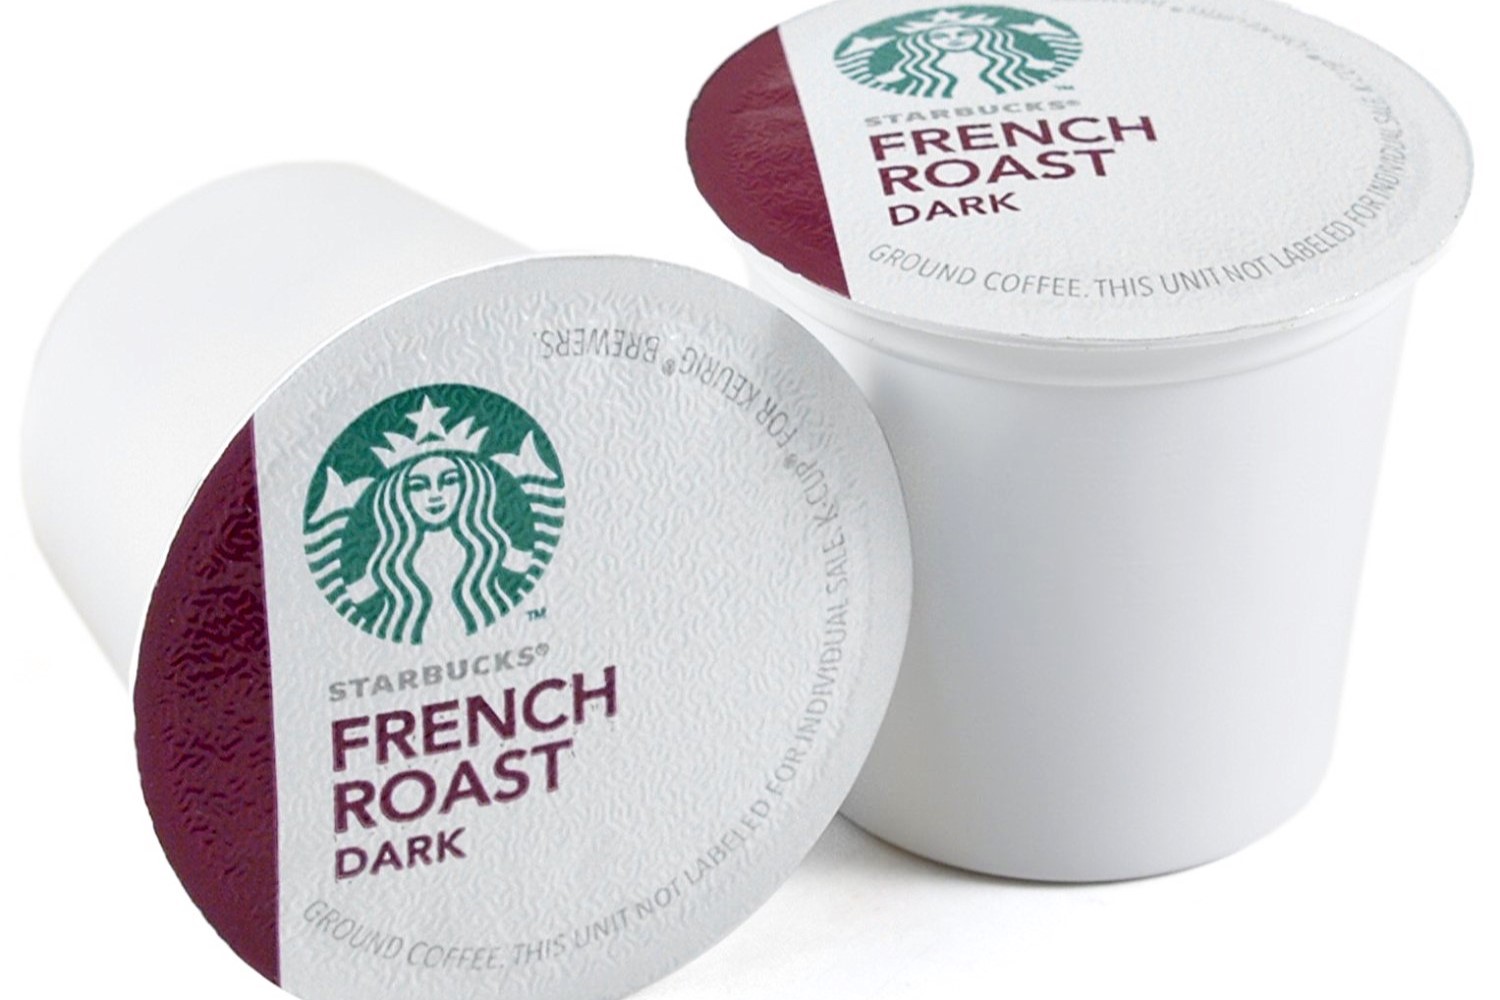 20-starbucks-french-roast-k-cups-nutrition-facts